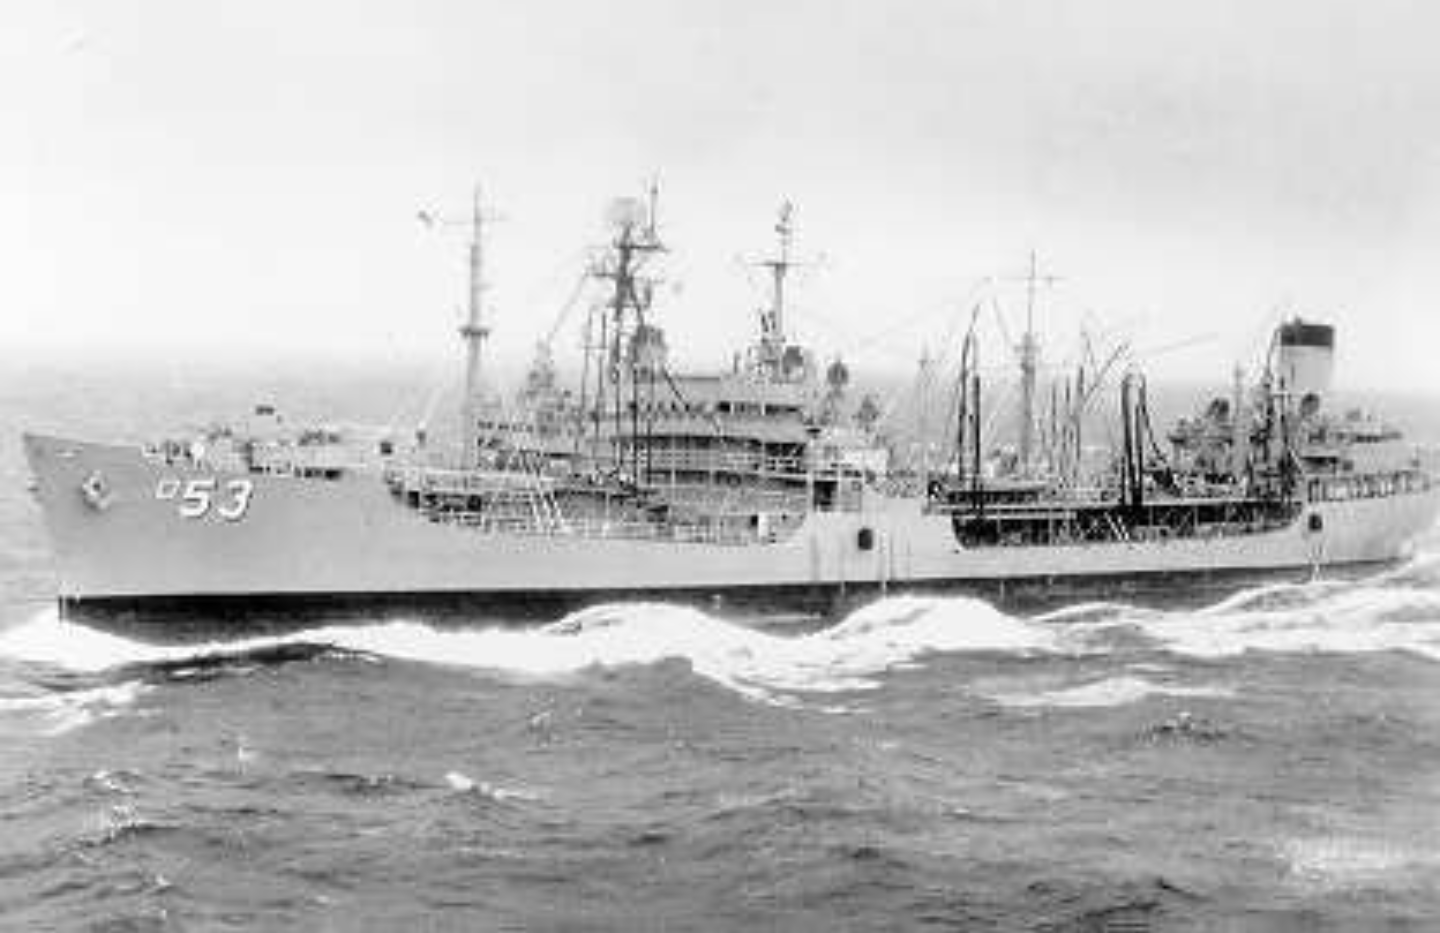 USS CALIENTE WITH OLD RIGGING AND FULL ARMAMENT